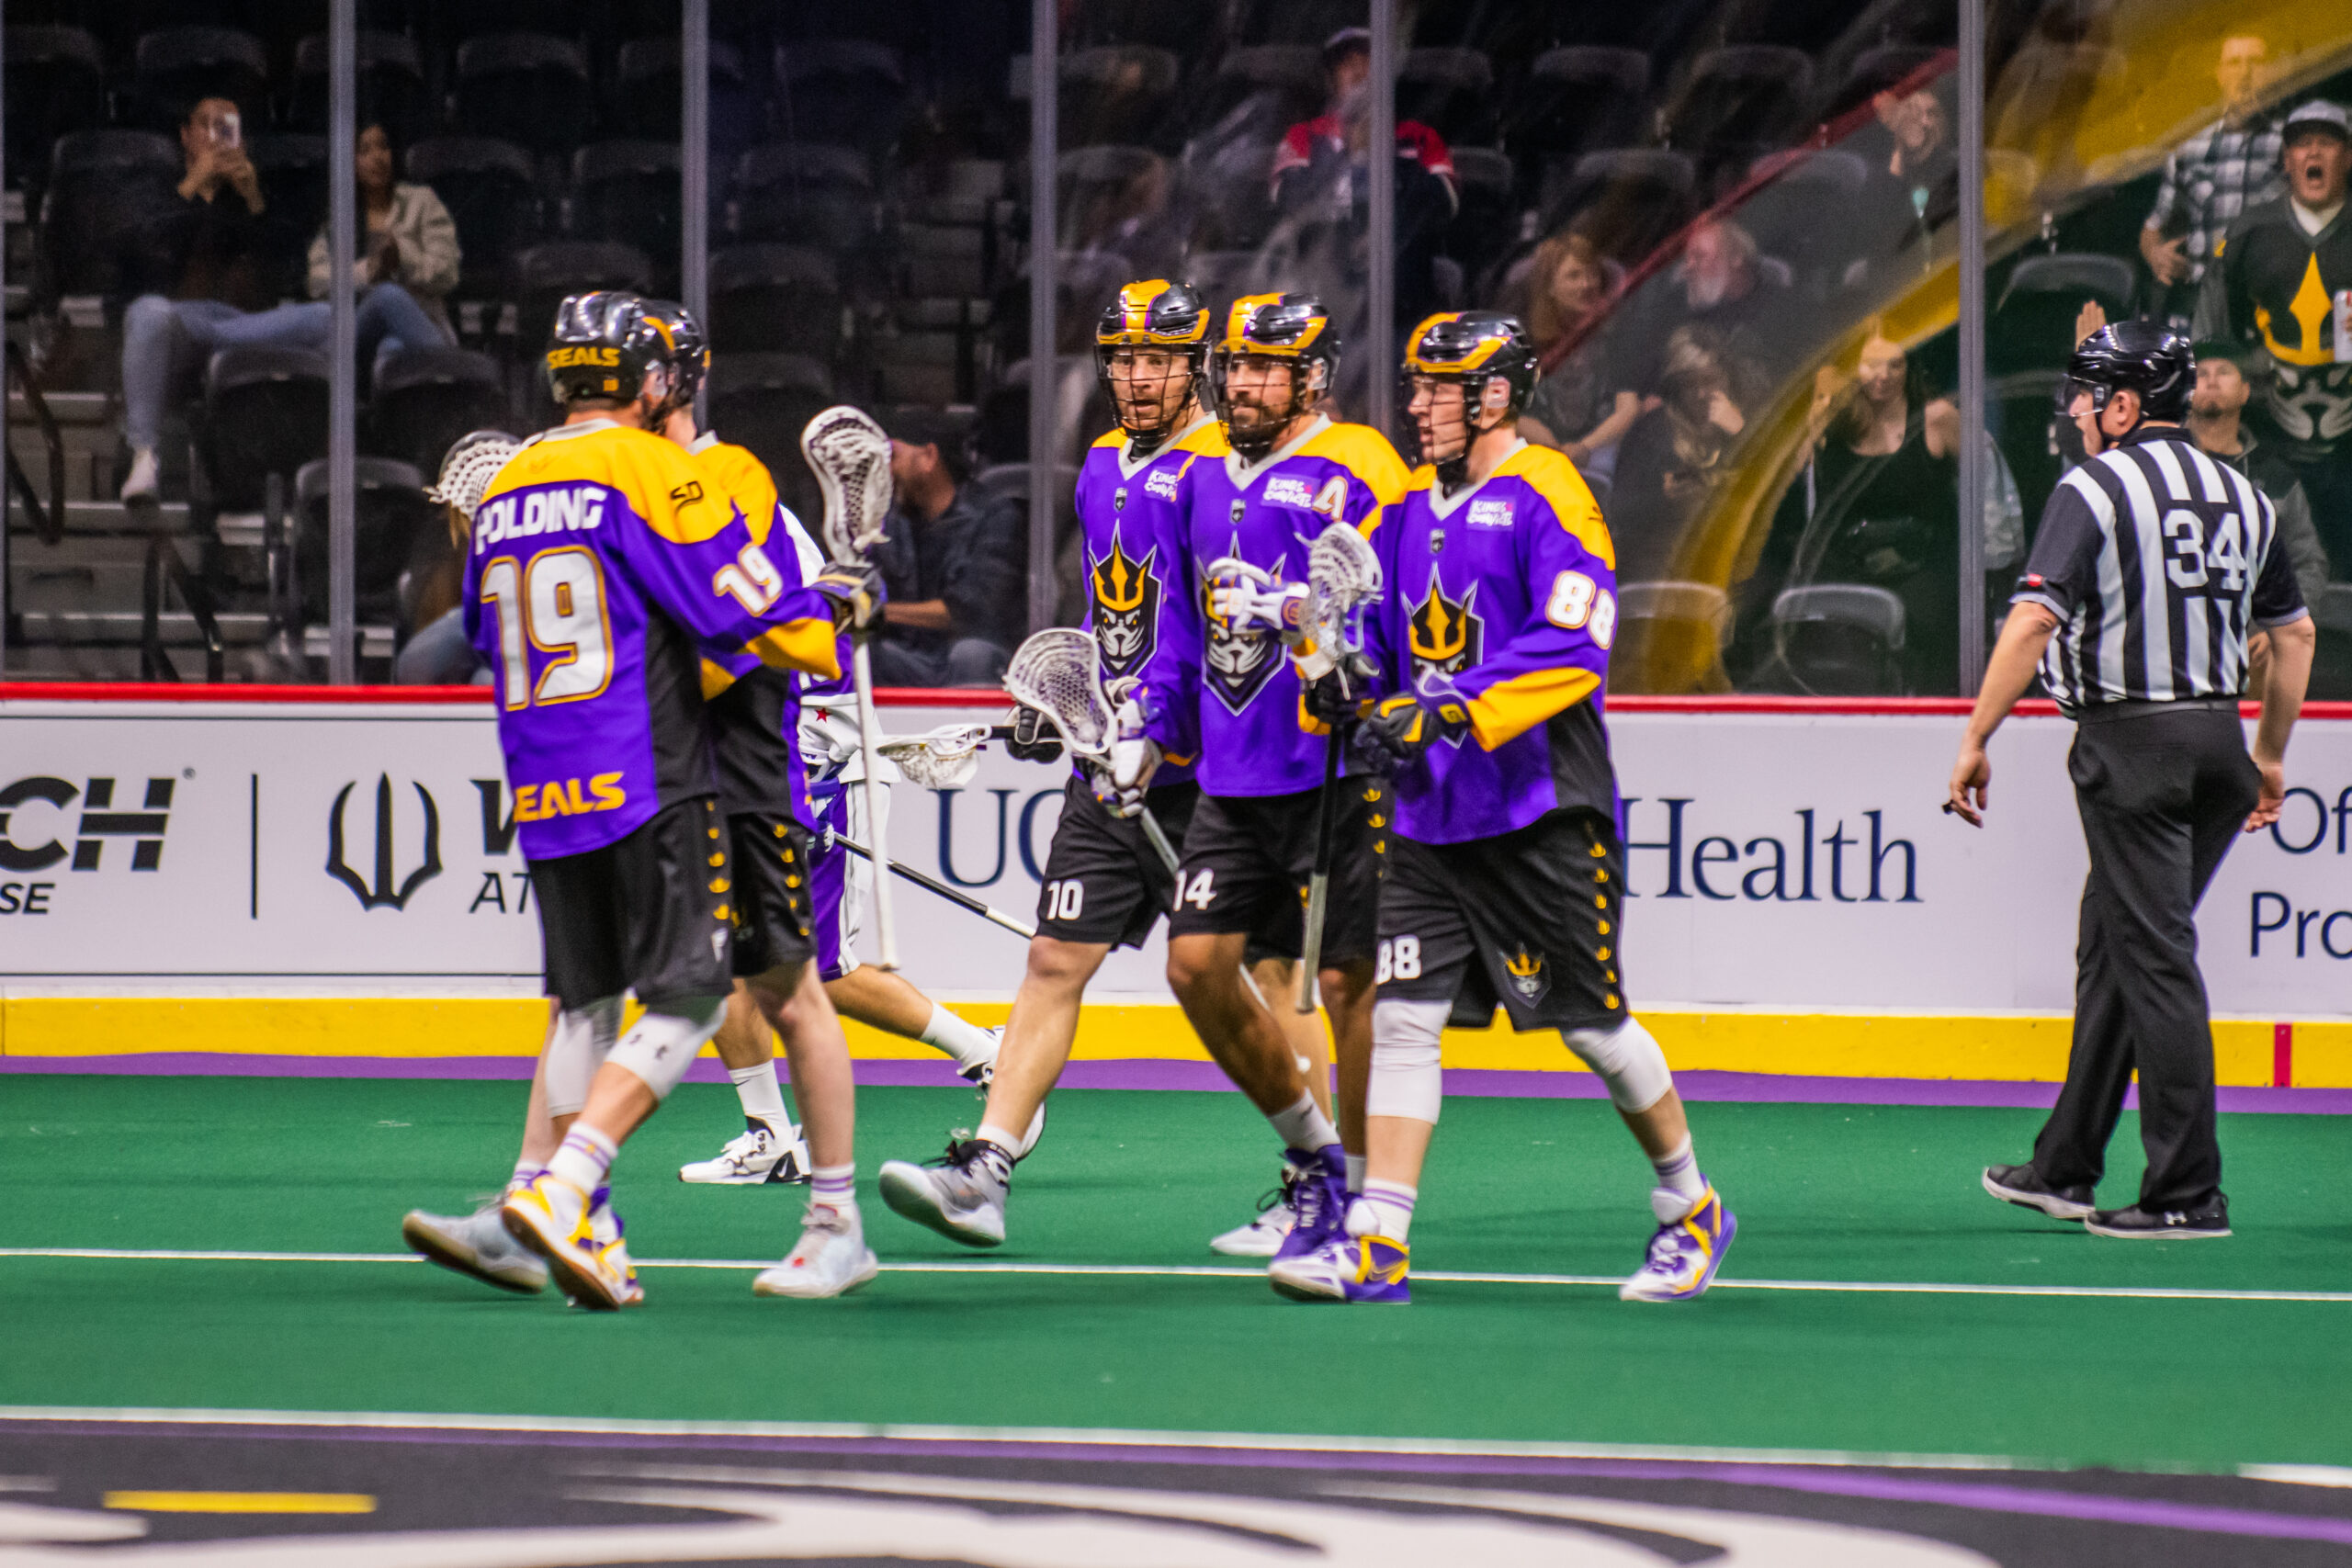 HIGHLIGHTS  Panther City Lacrosse Club vs San Diego Seals - NLL